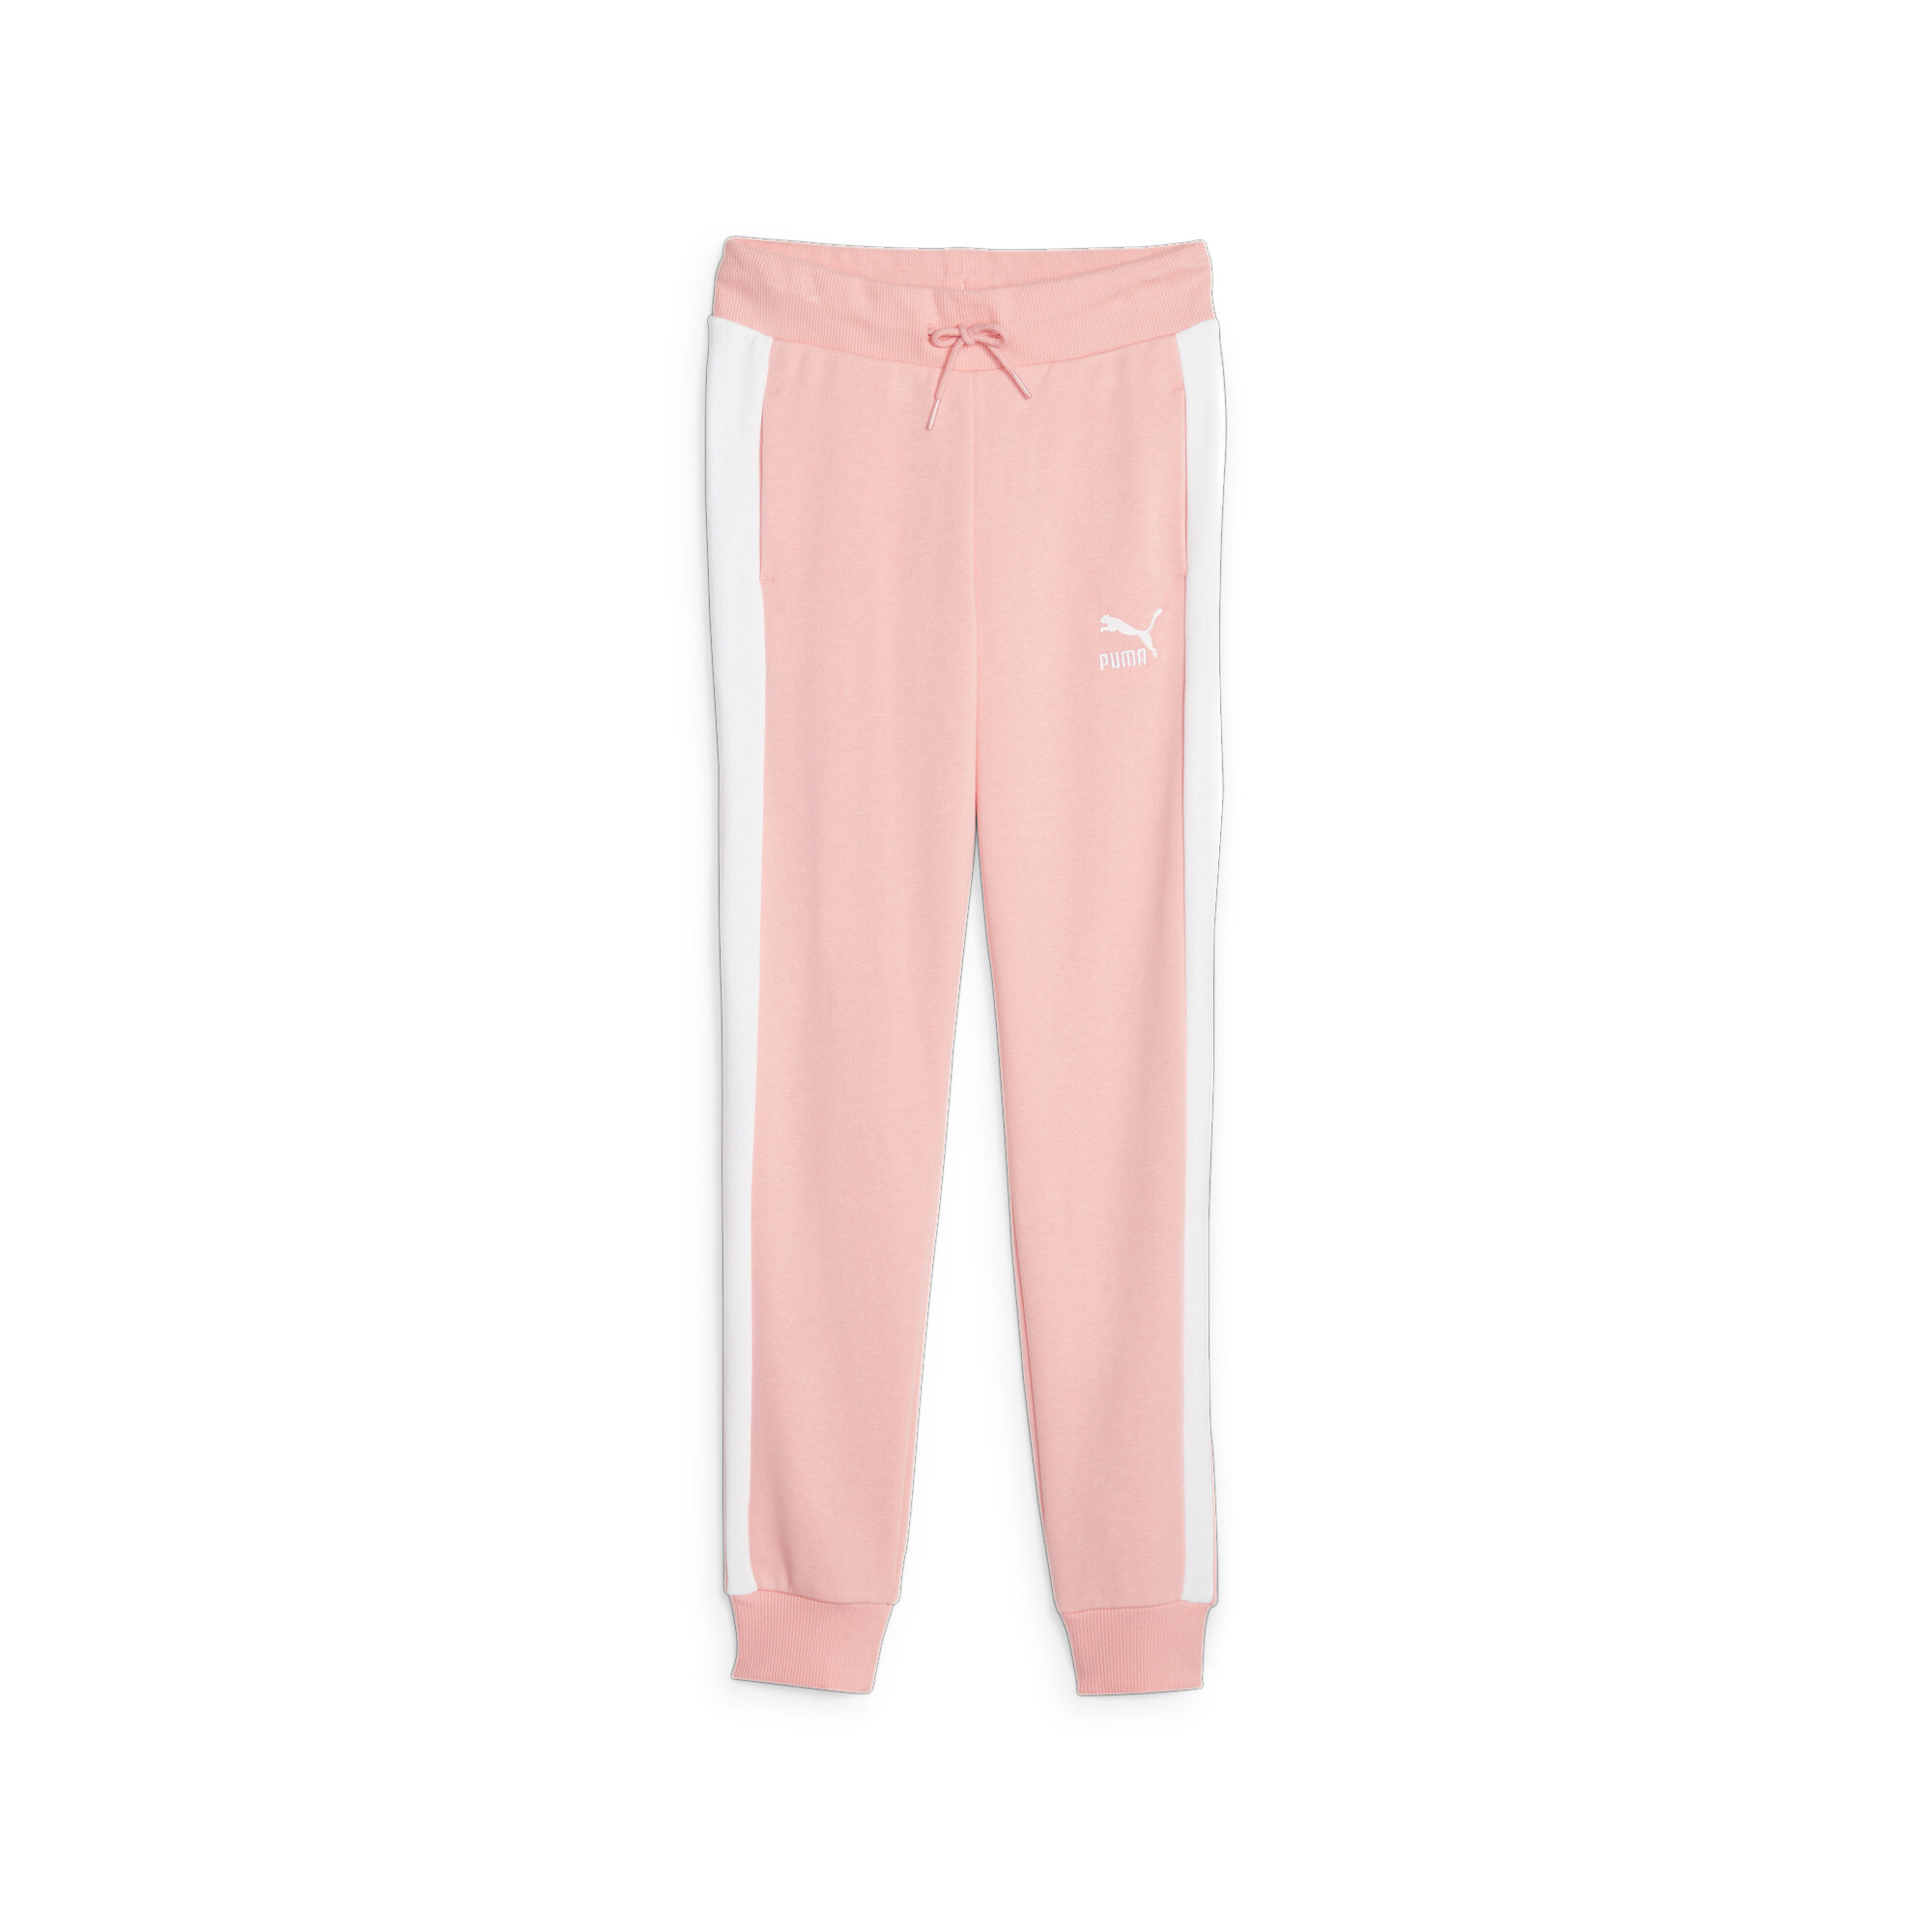 PUMA Classics T7 Track Pants In Pink, Size 4-5 Youth